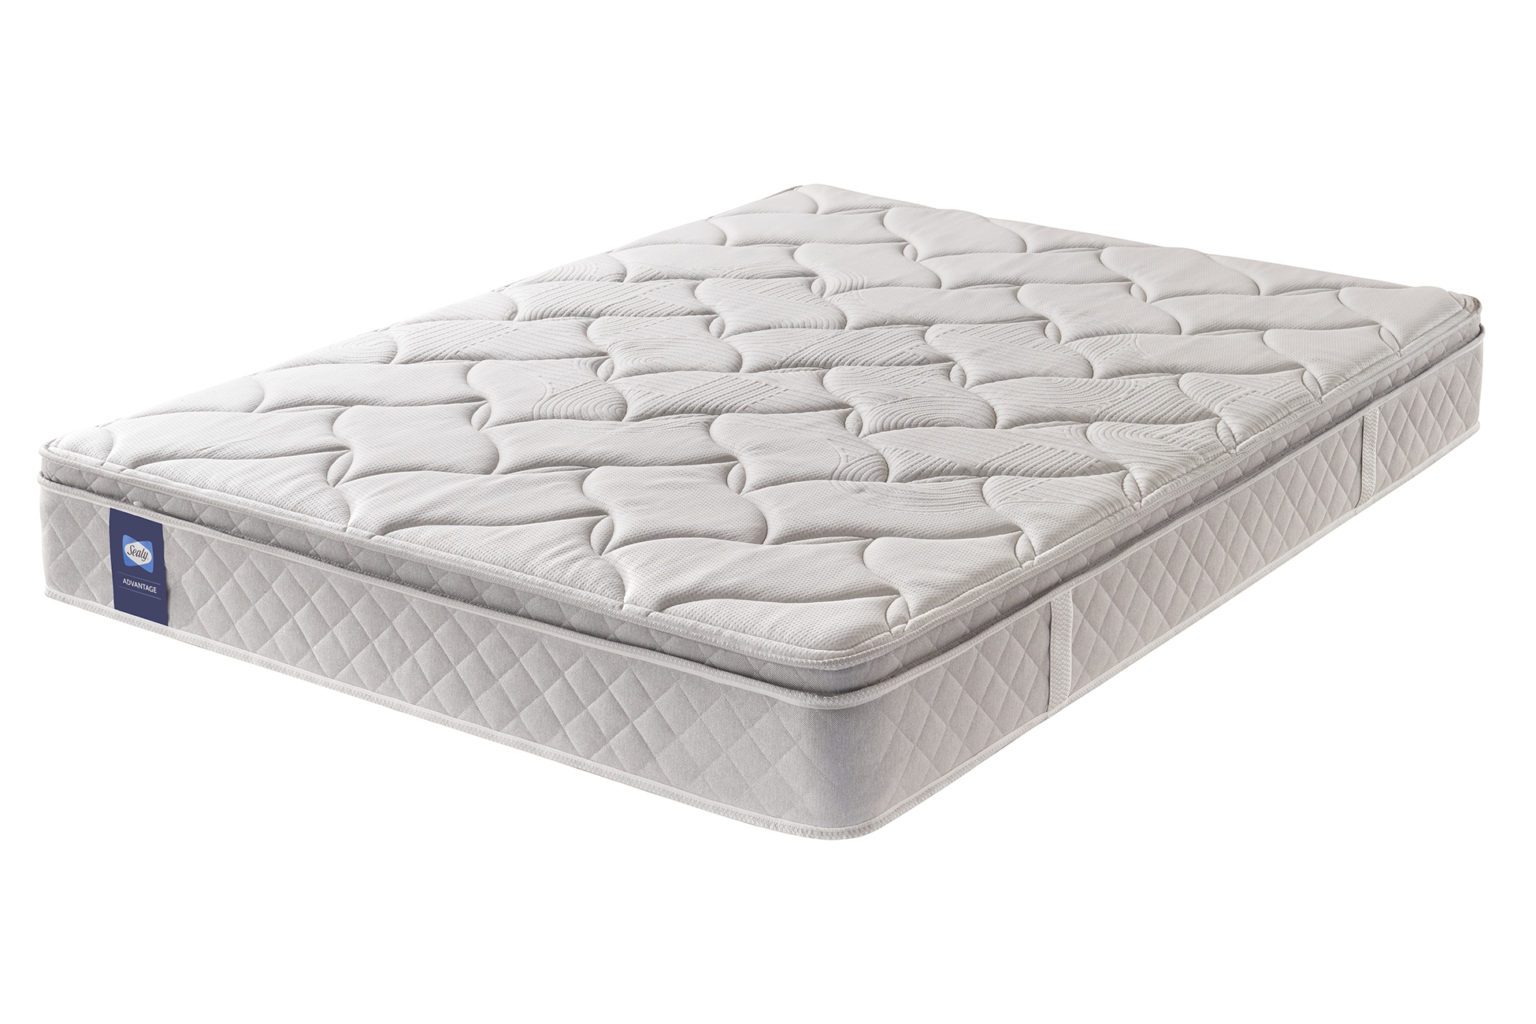 reviews of the sealy acknowledge pillowtop mattress